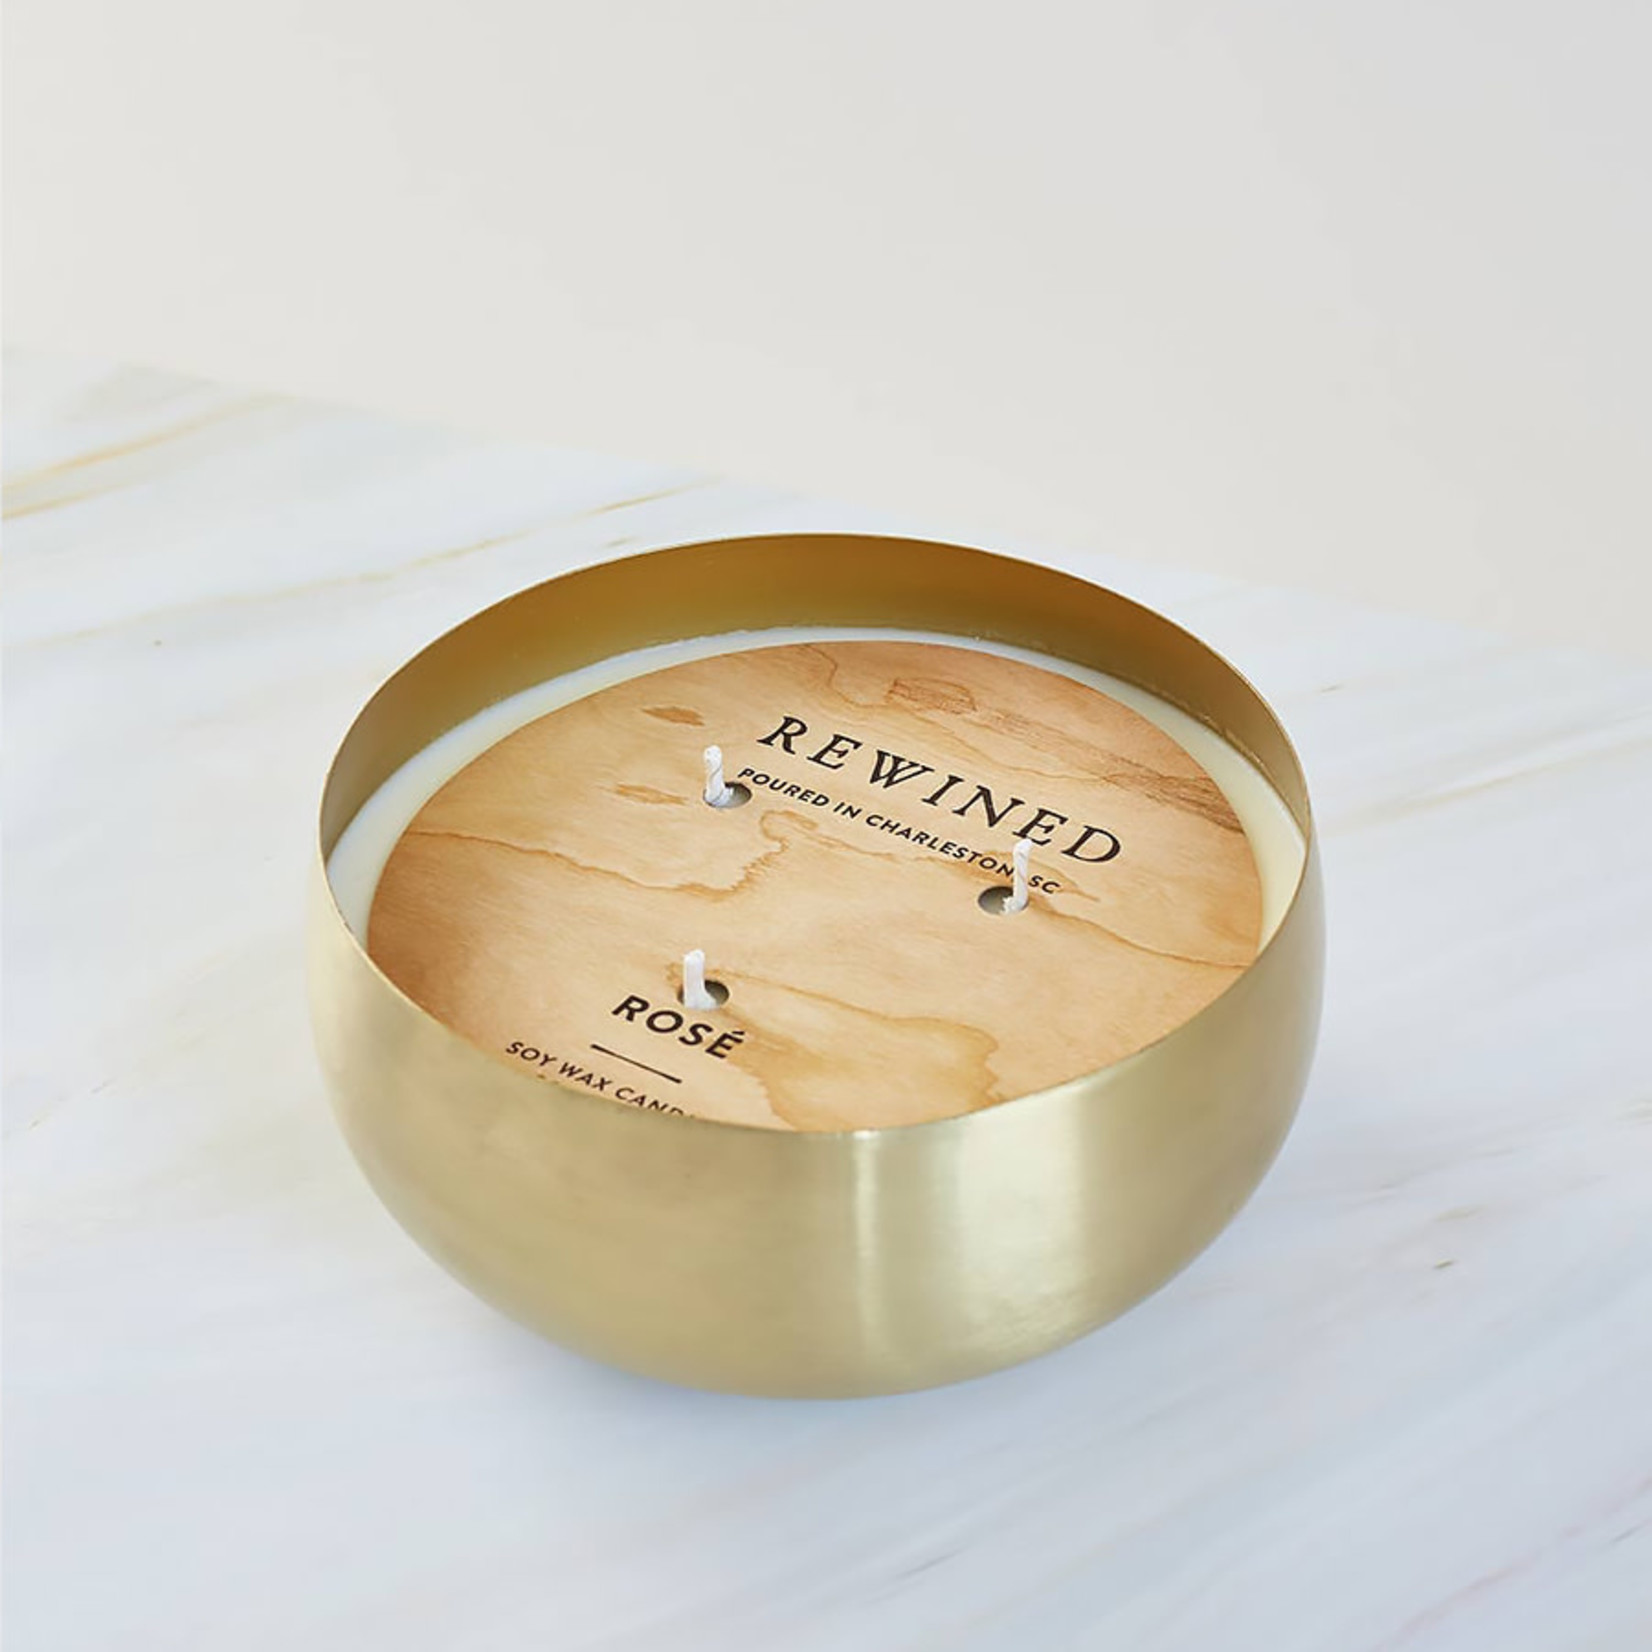 Rewined Gold Bowl Candle